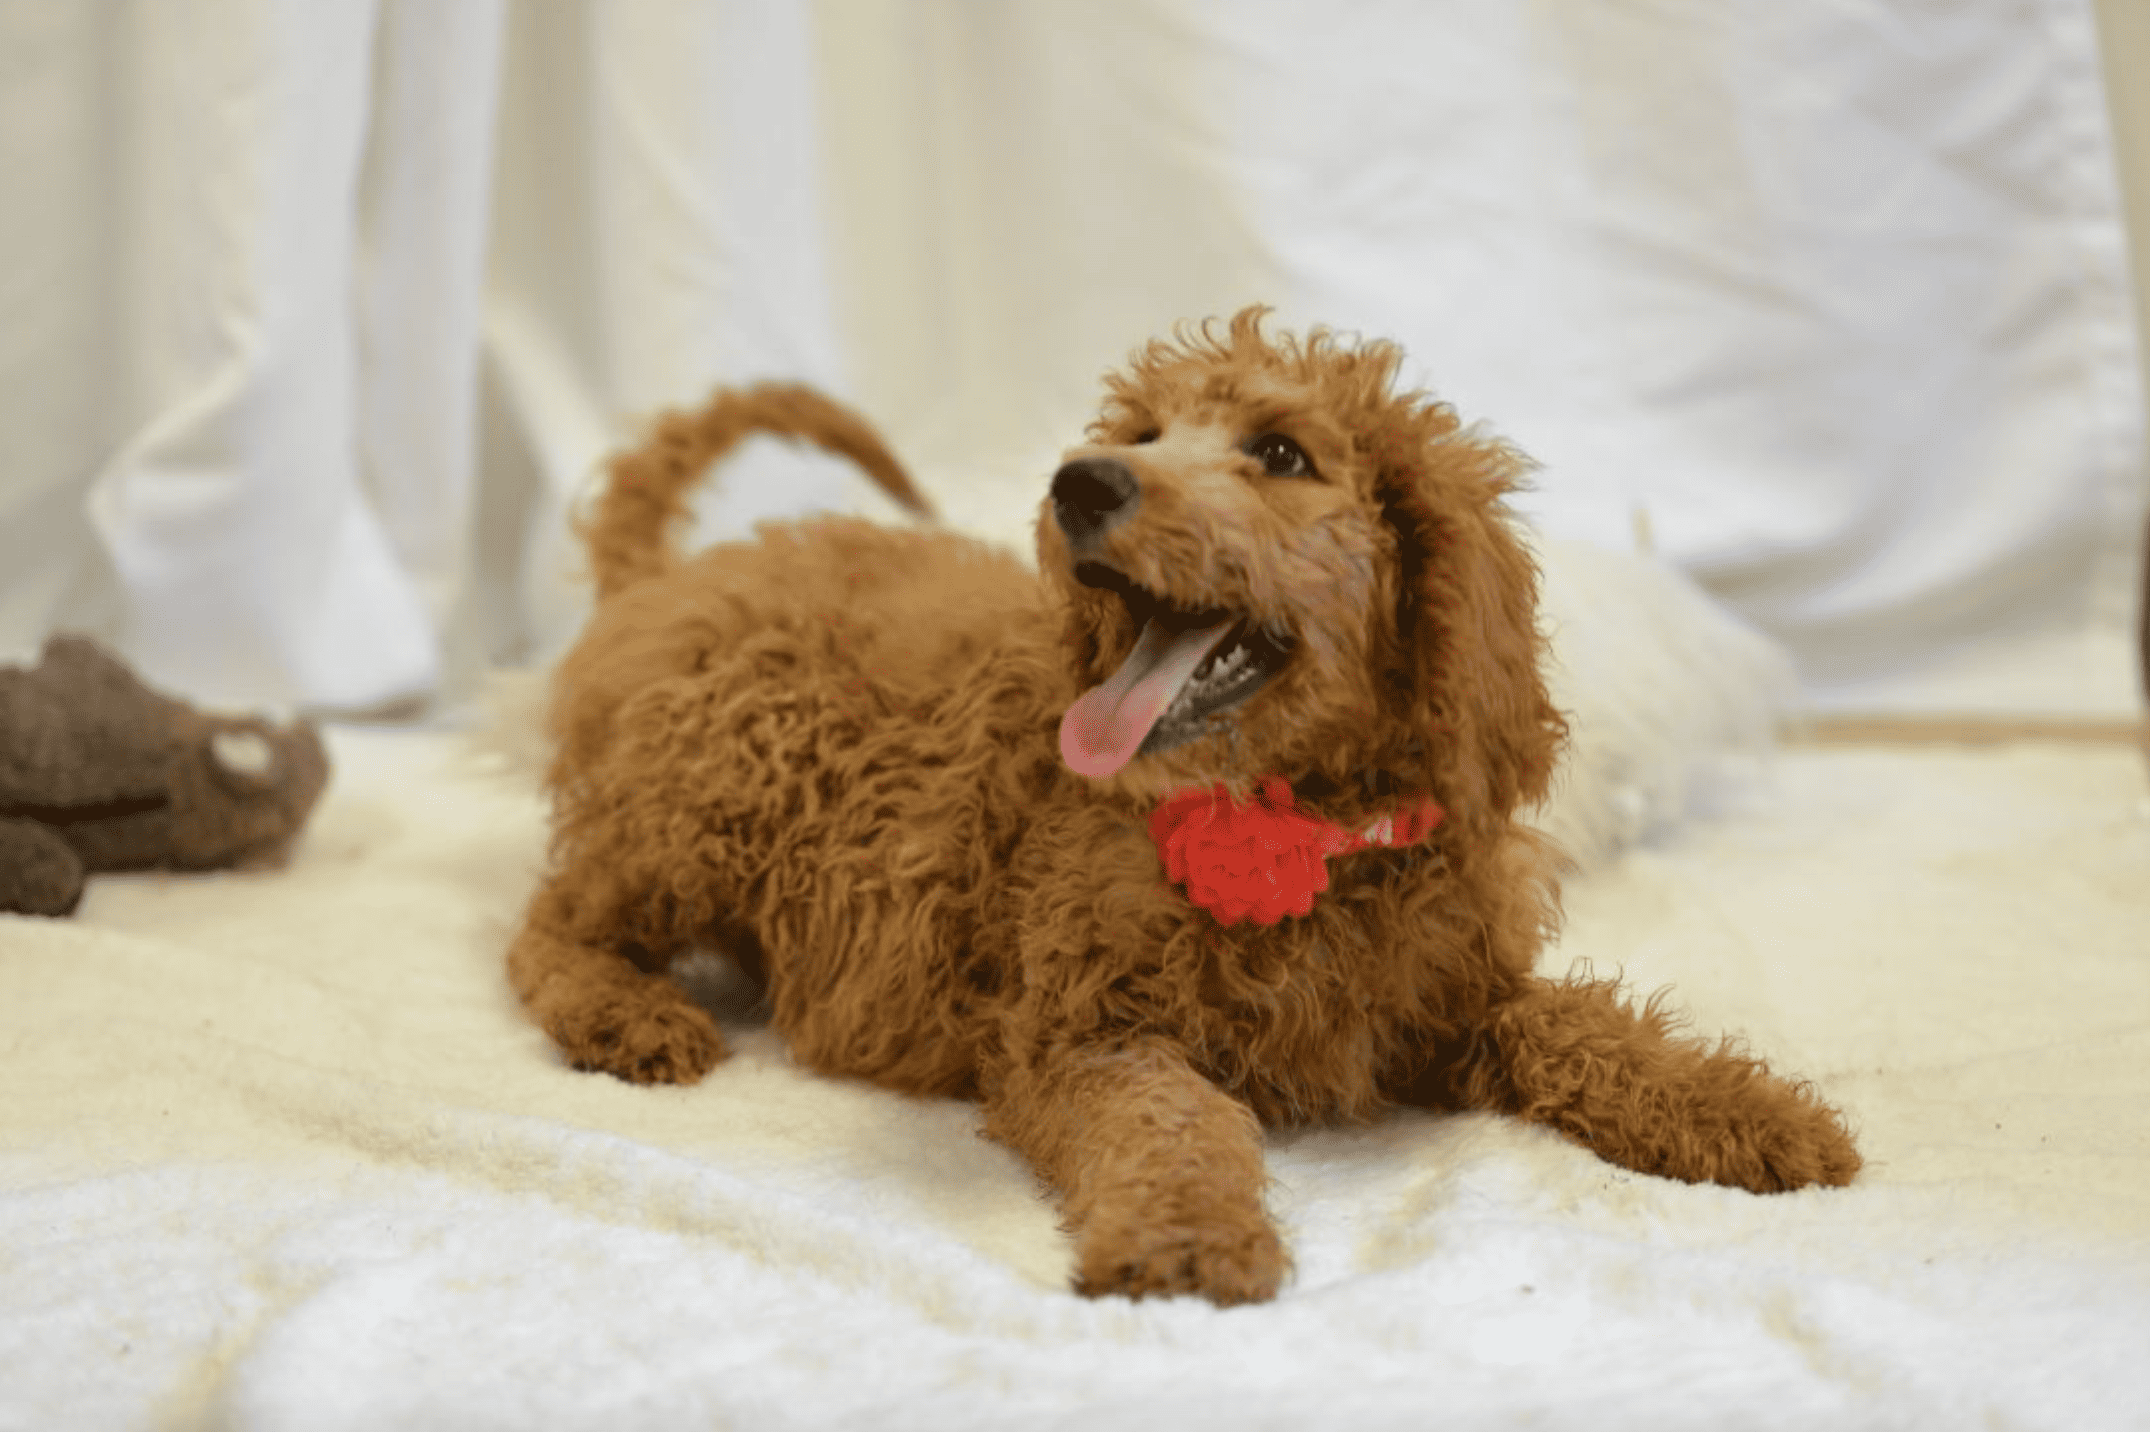 A Complete Guide on Potty Training Your Goldendoodle